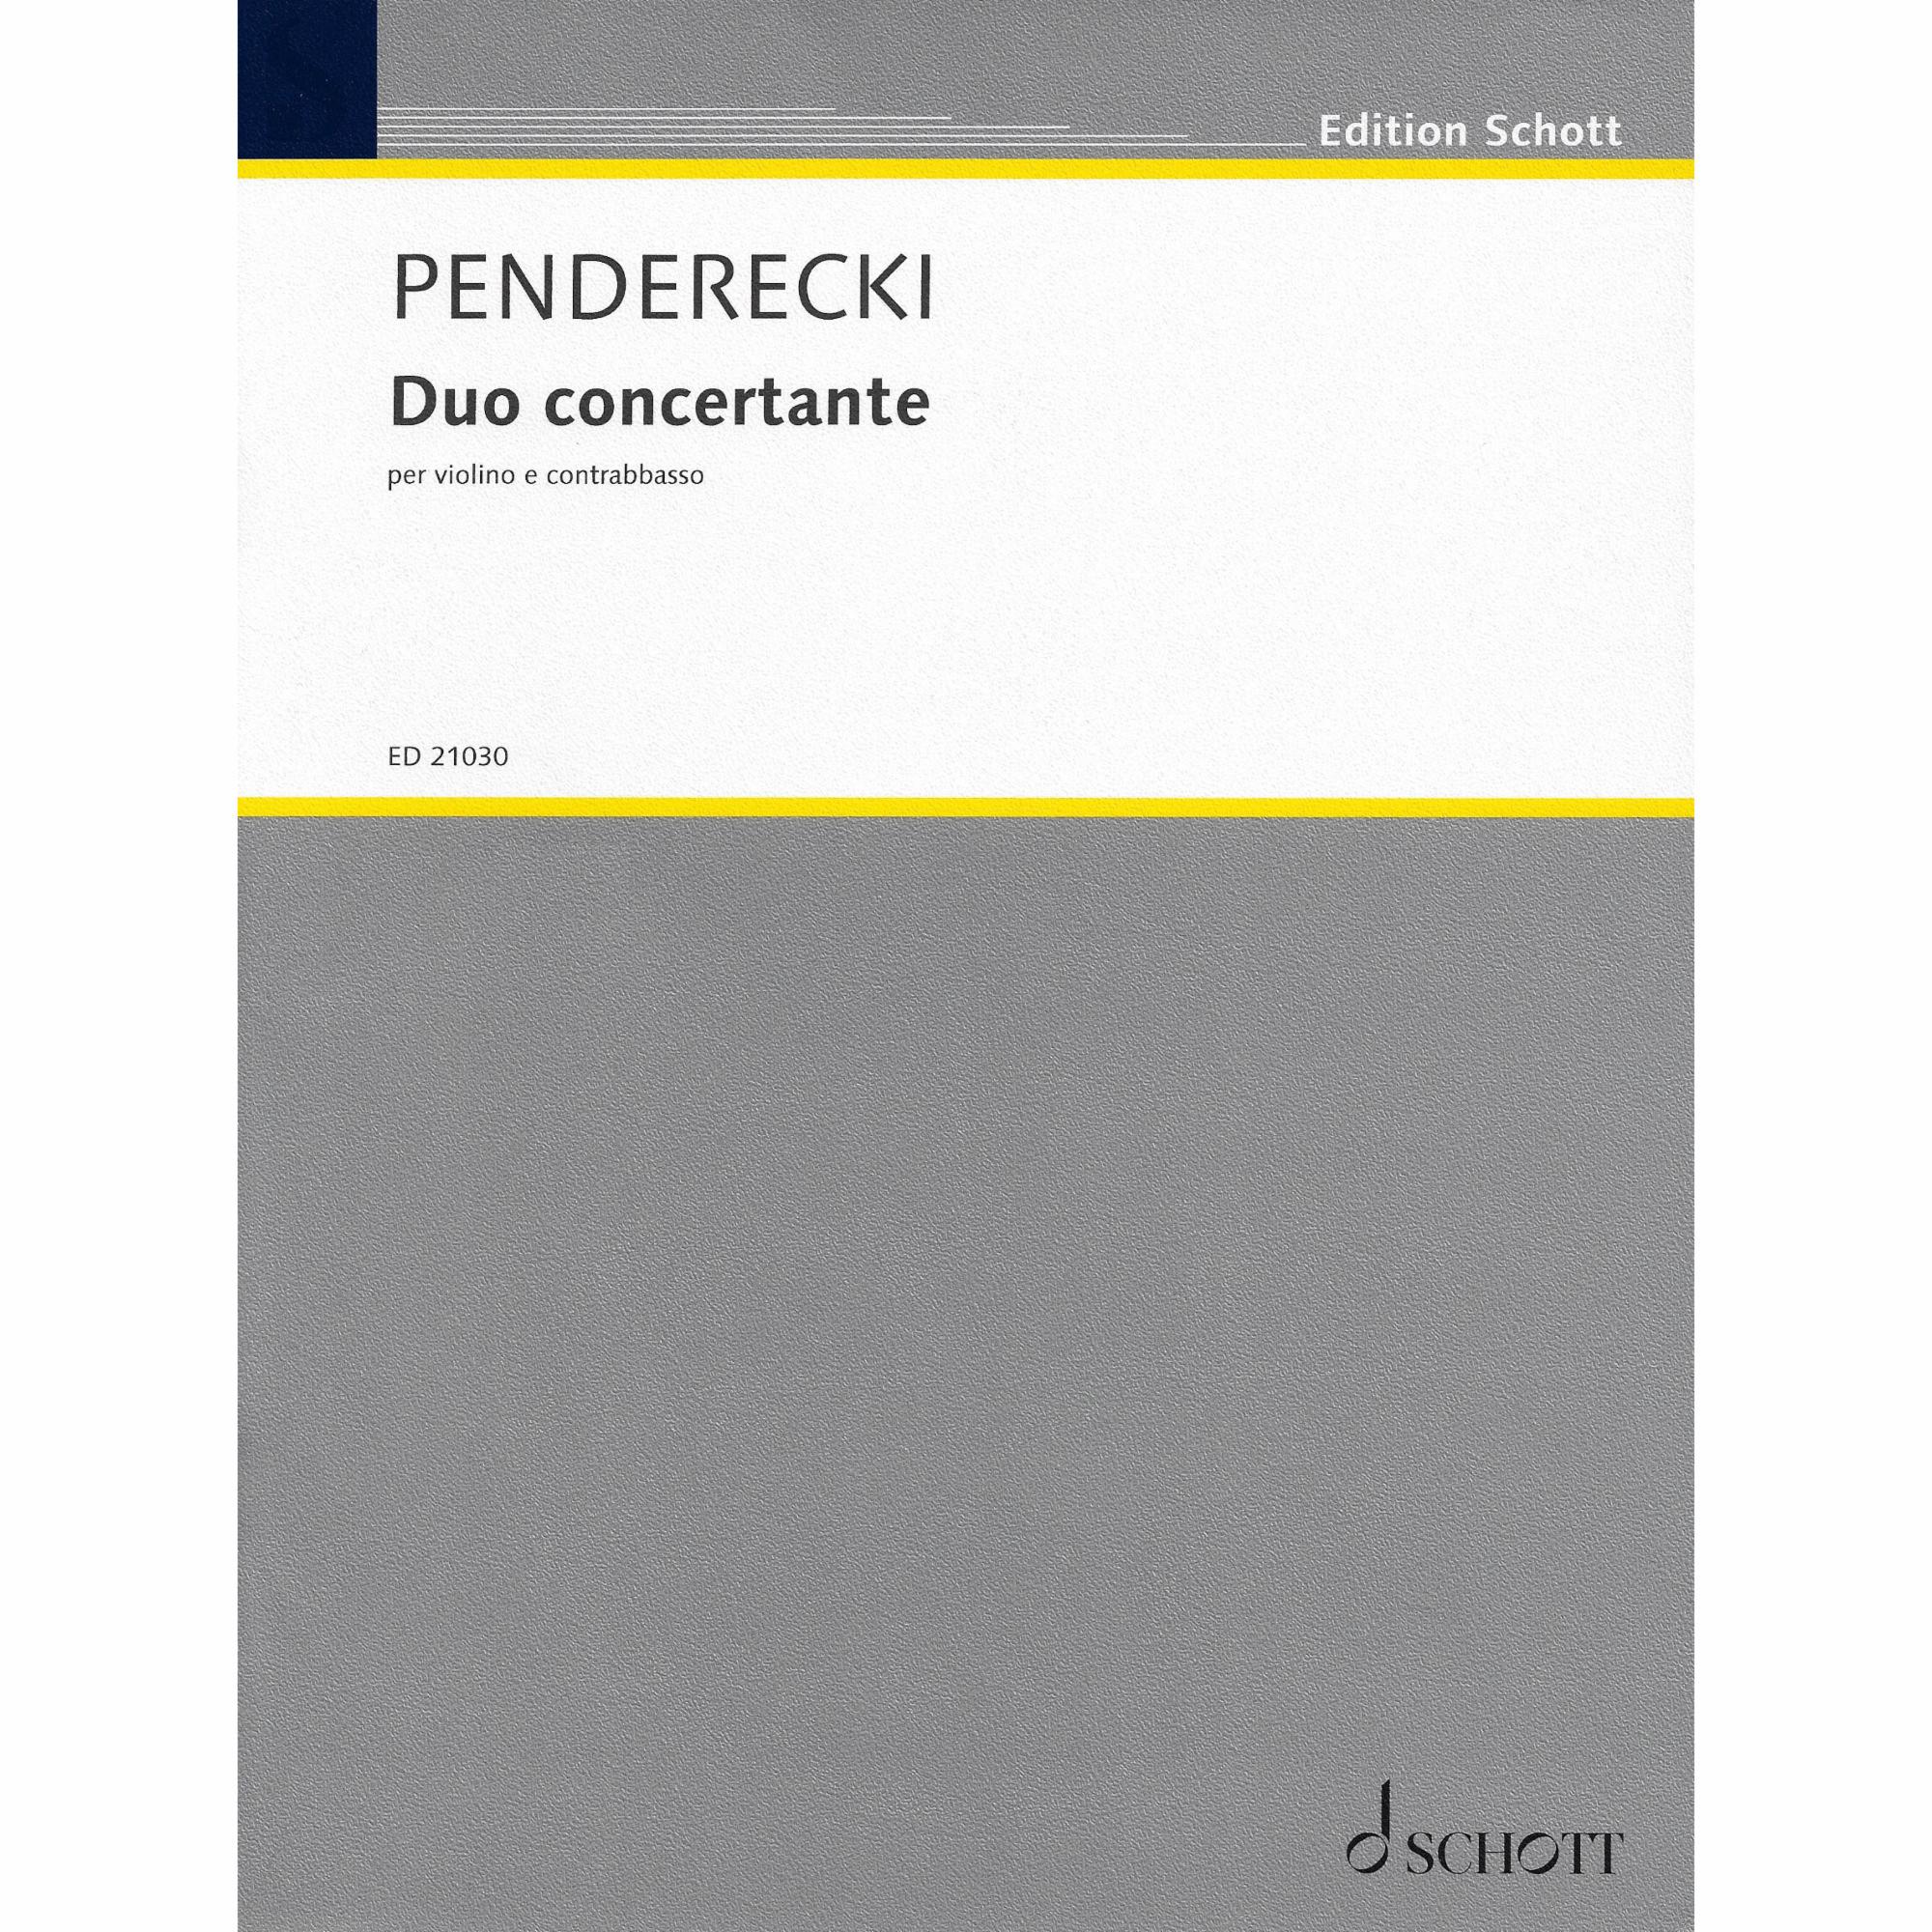 Penderecki -- Duo concertante for Violin and Bass